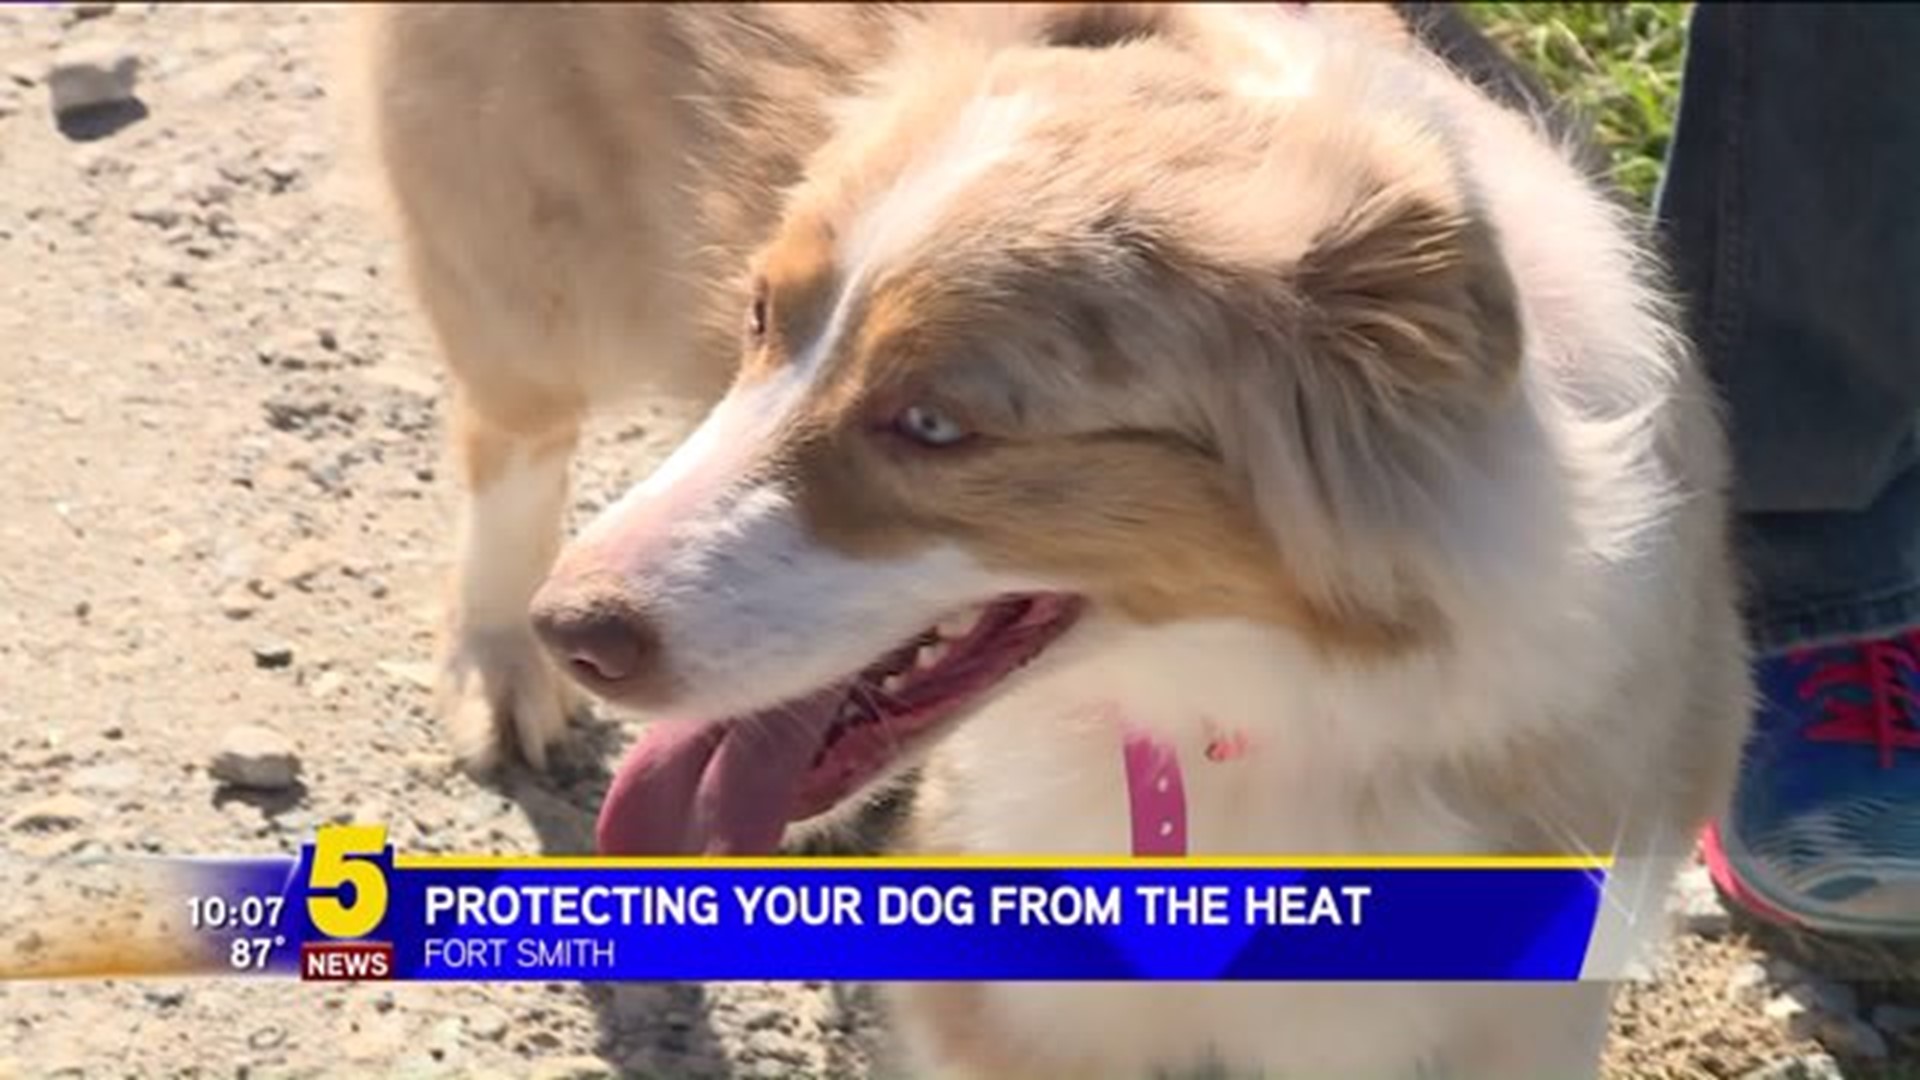 PROTECTING YOUR DOG FROM THE HEAT